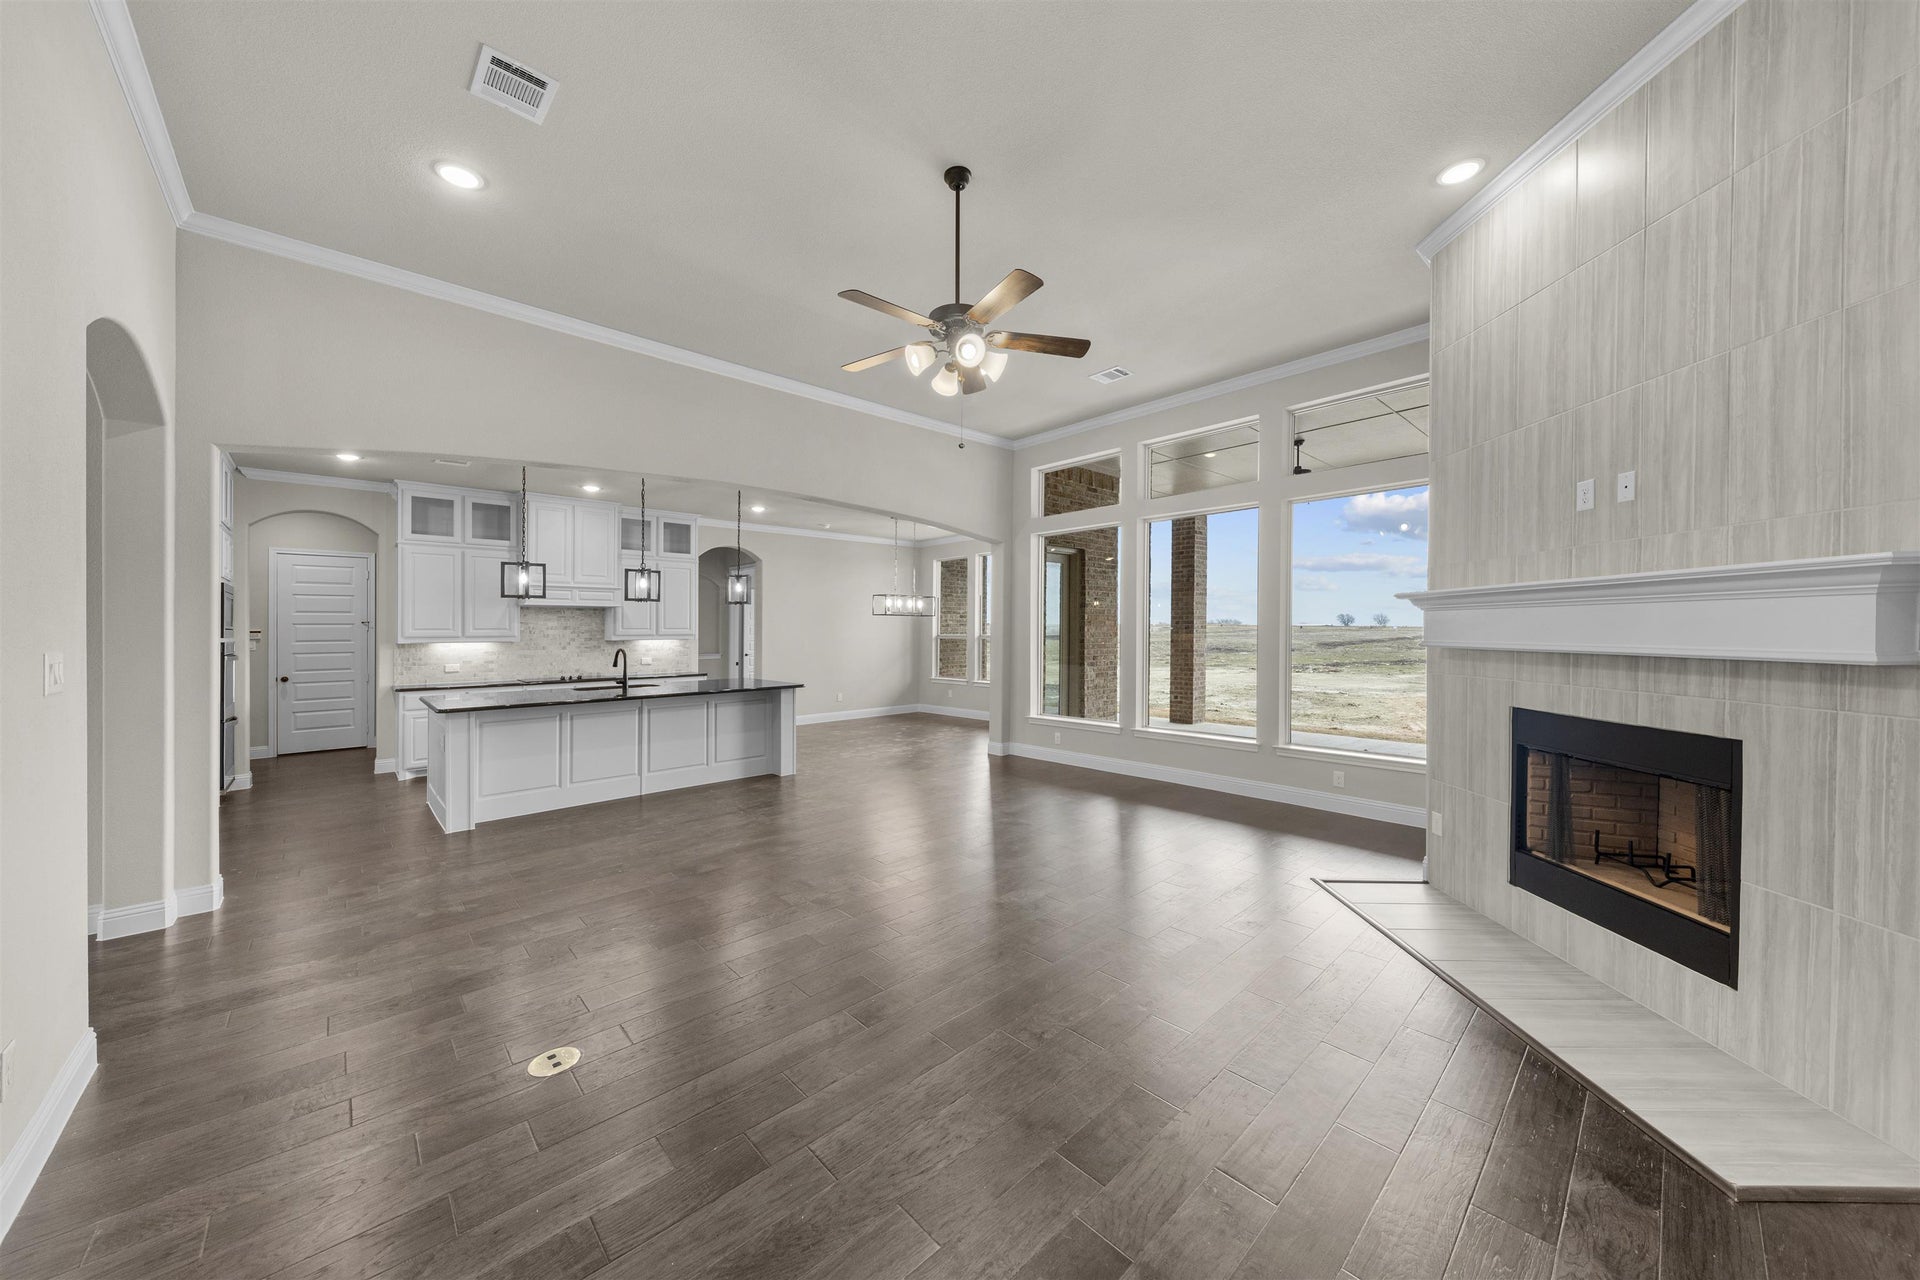 5br New Home in New Fairview, TX